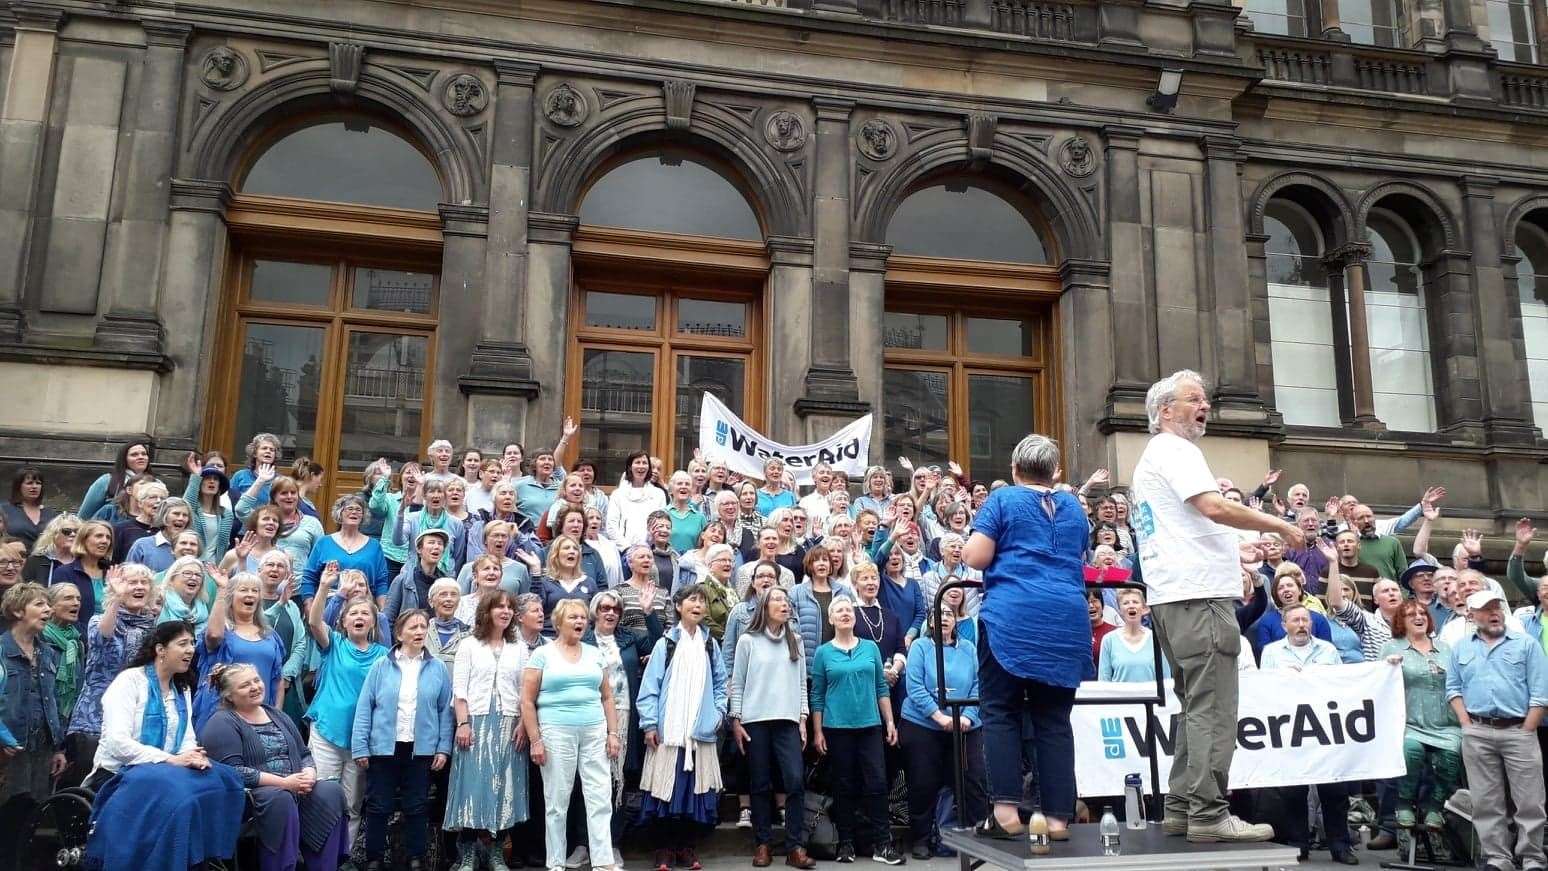 Members of the choir have visited Edinburgh on three times to support the Water Aid charity at a massed sing-song jointly conducted by Bill Henderson.